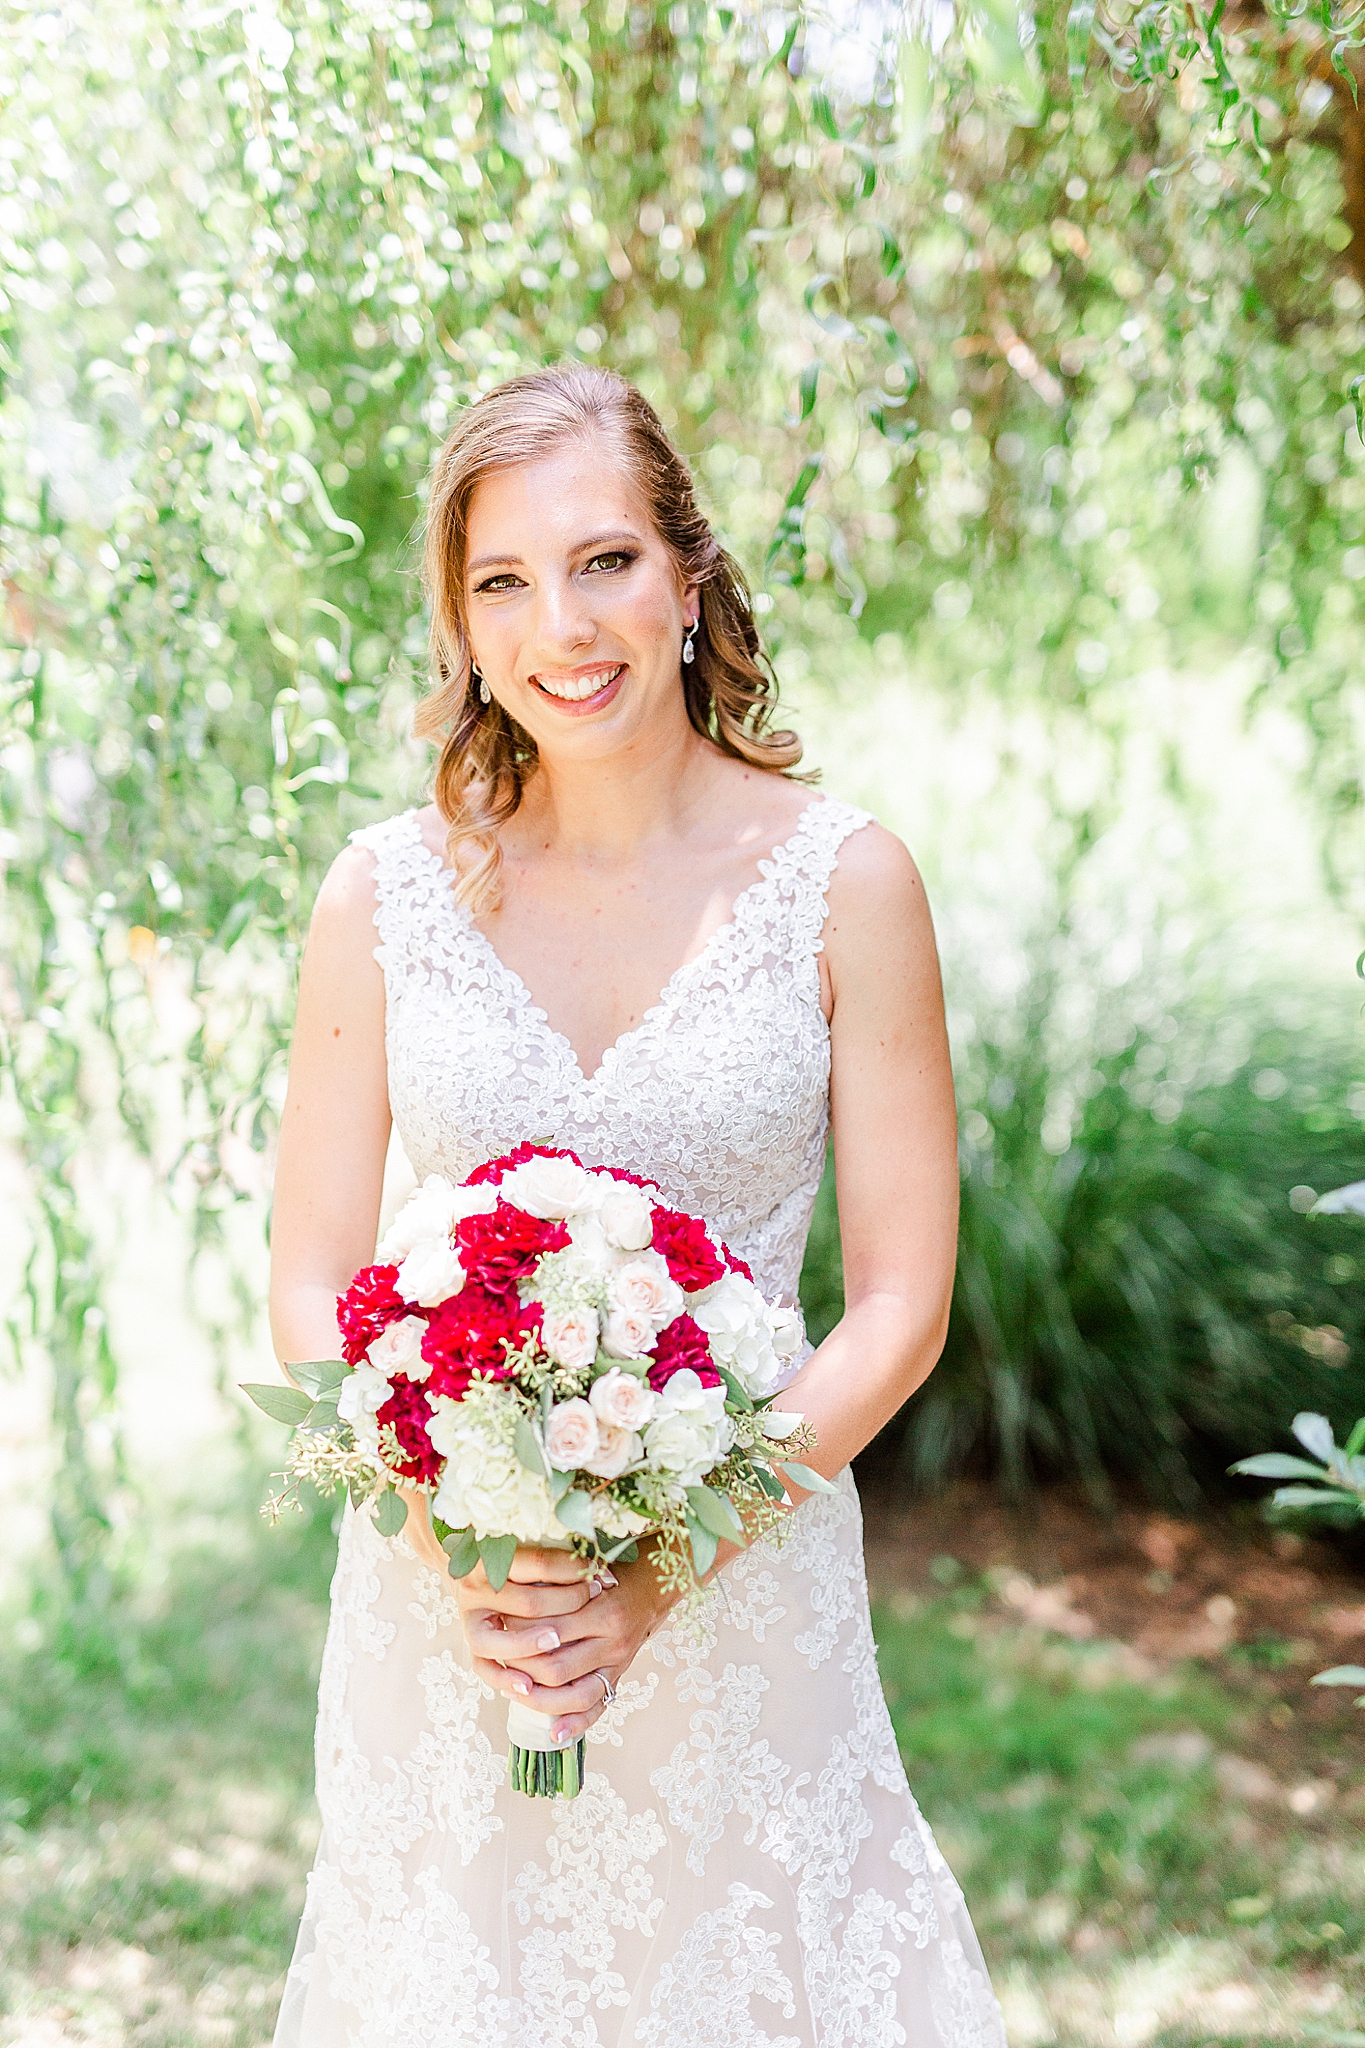 Alexander Homestead bridal portraits for bride holding red and white flowers